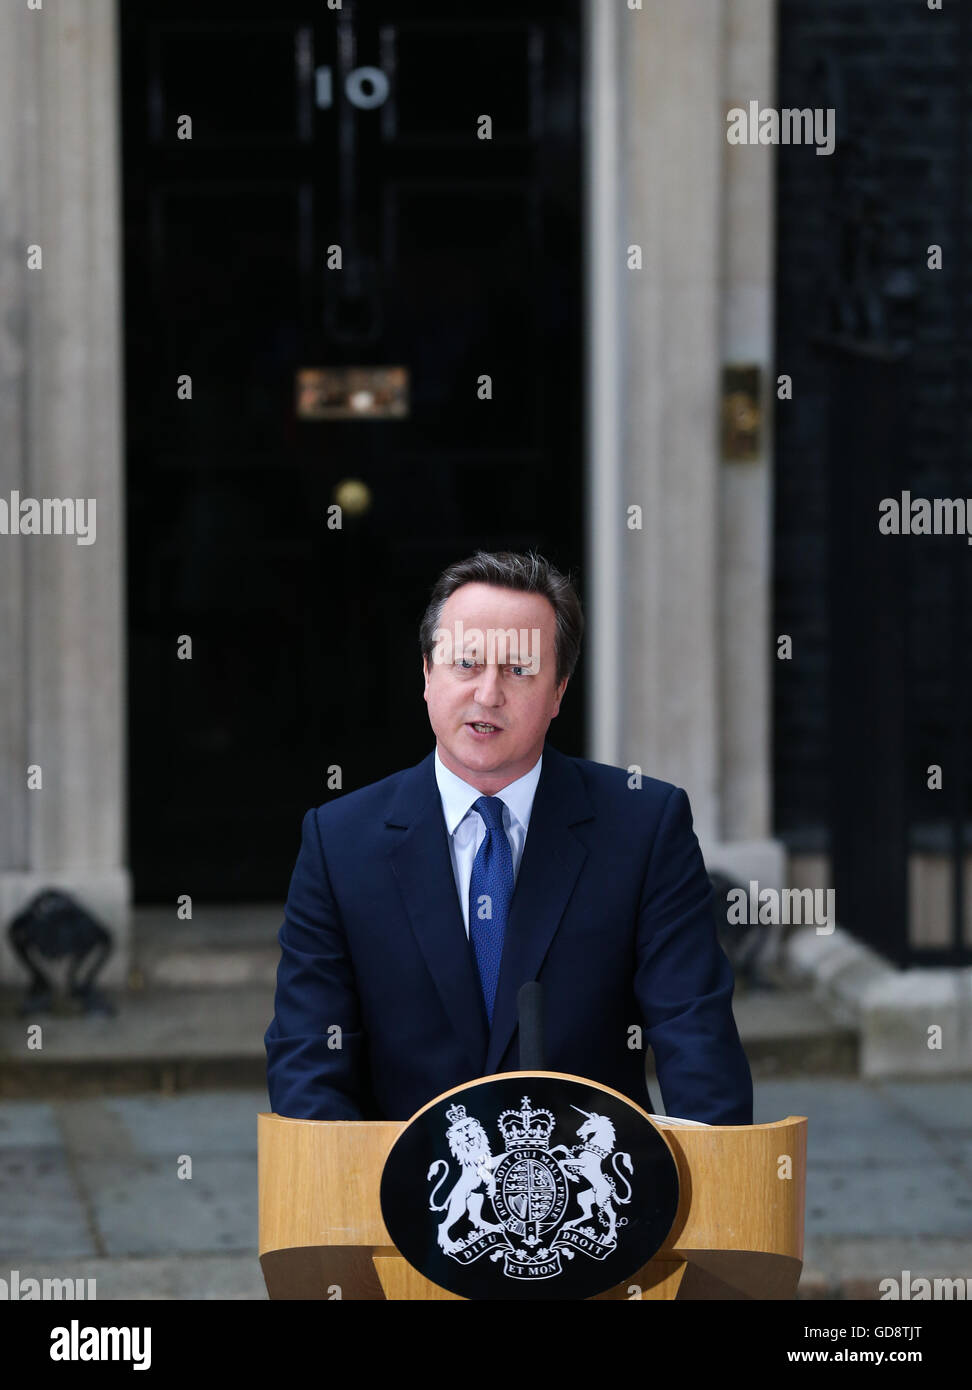 London, UK. 13th July, 2016. British outgoing Prime Minister David Cameron gives a speech before leaving 10 Downing Street in London, Britain on July 13, 2016. Cameron bid farewell to 10 Downing Street and headed to Buckingham Palace to offer his resignation to Queen Elizabeth II on Wednesday afternoon. Credit:  Han Yan/Xinhua/Alamy Live News Stock Photo